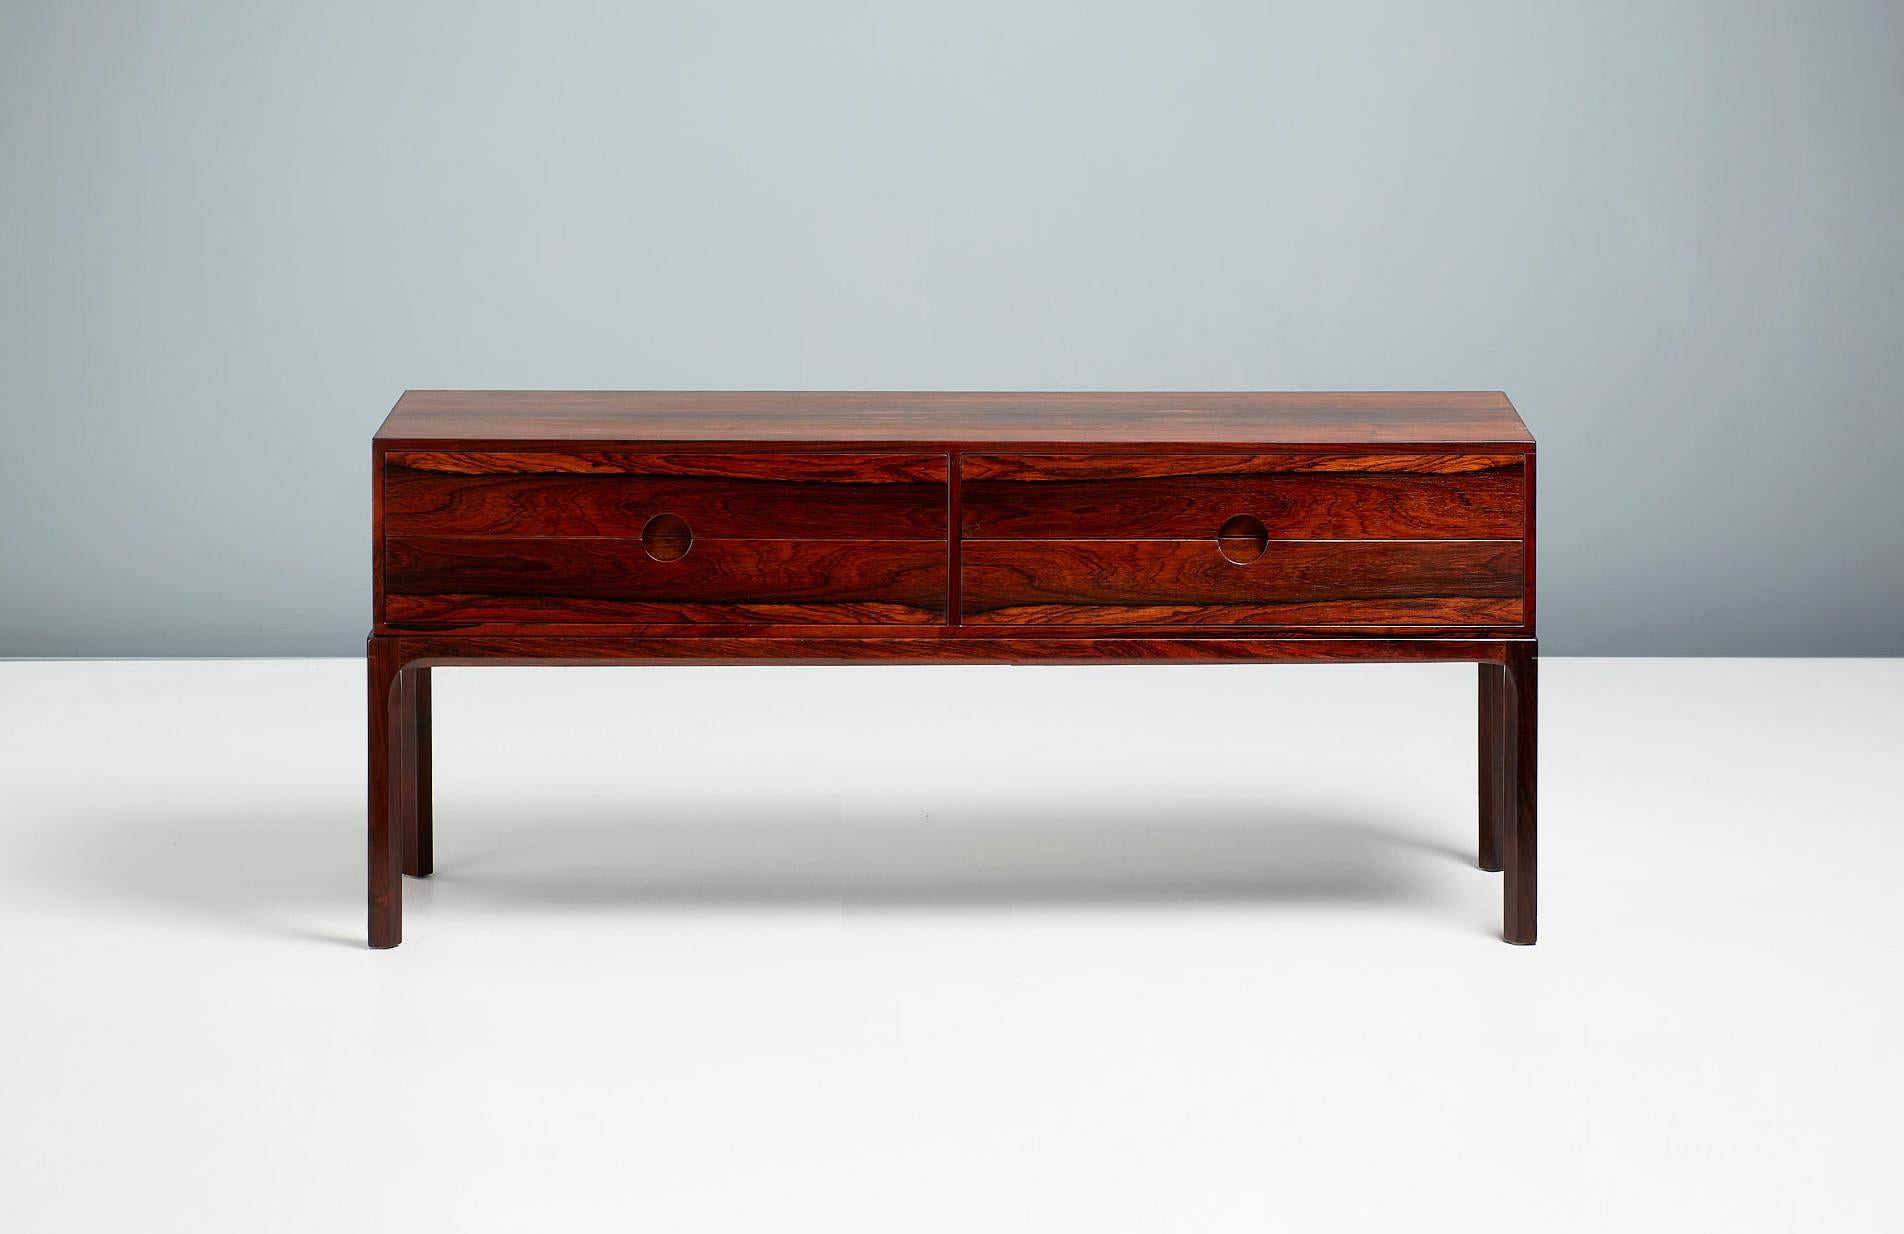 Kai Kristiansen.

Model 384 chest, c1960.

Low, 4-drawer chest made from highly figured rosewood, produced by Aksel Kjersgaard in Odder, Denmark, c1960. Features Kristiansen’s trademark circular drawer pulls. 

Measures: H 52 cm 
W 118 cm 
D